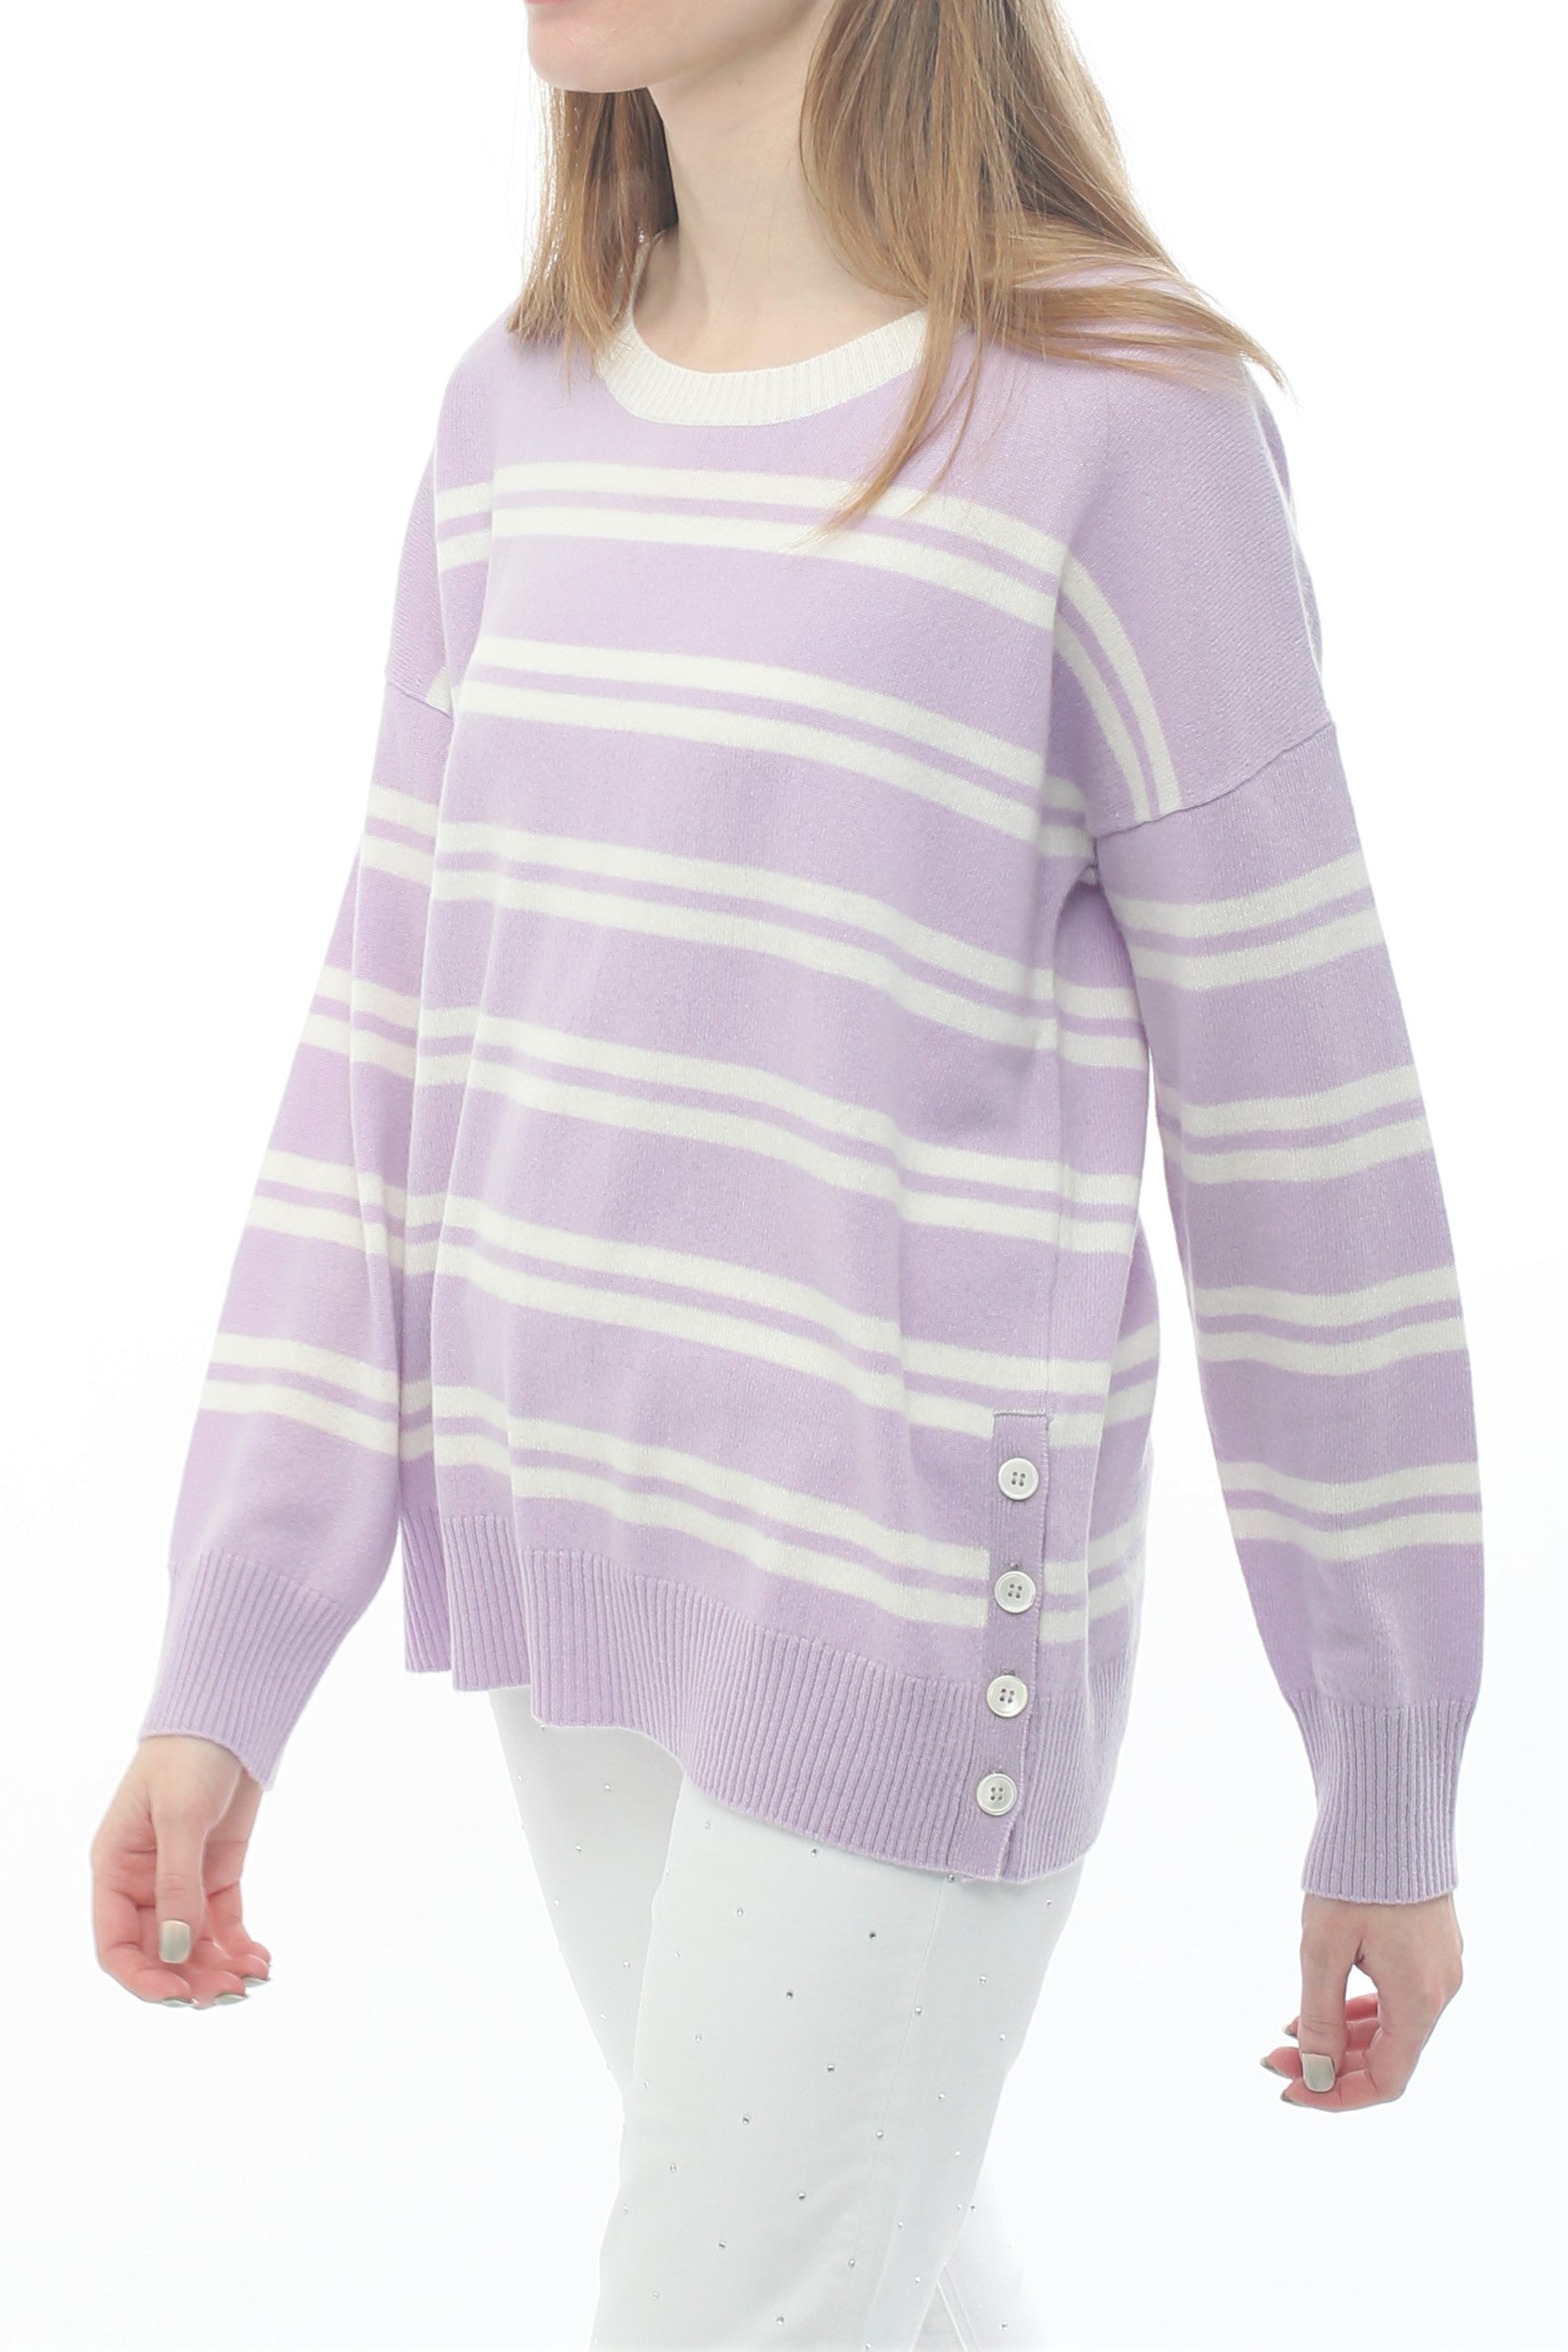 100% Cashmere Stripe With Side Button Detail